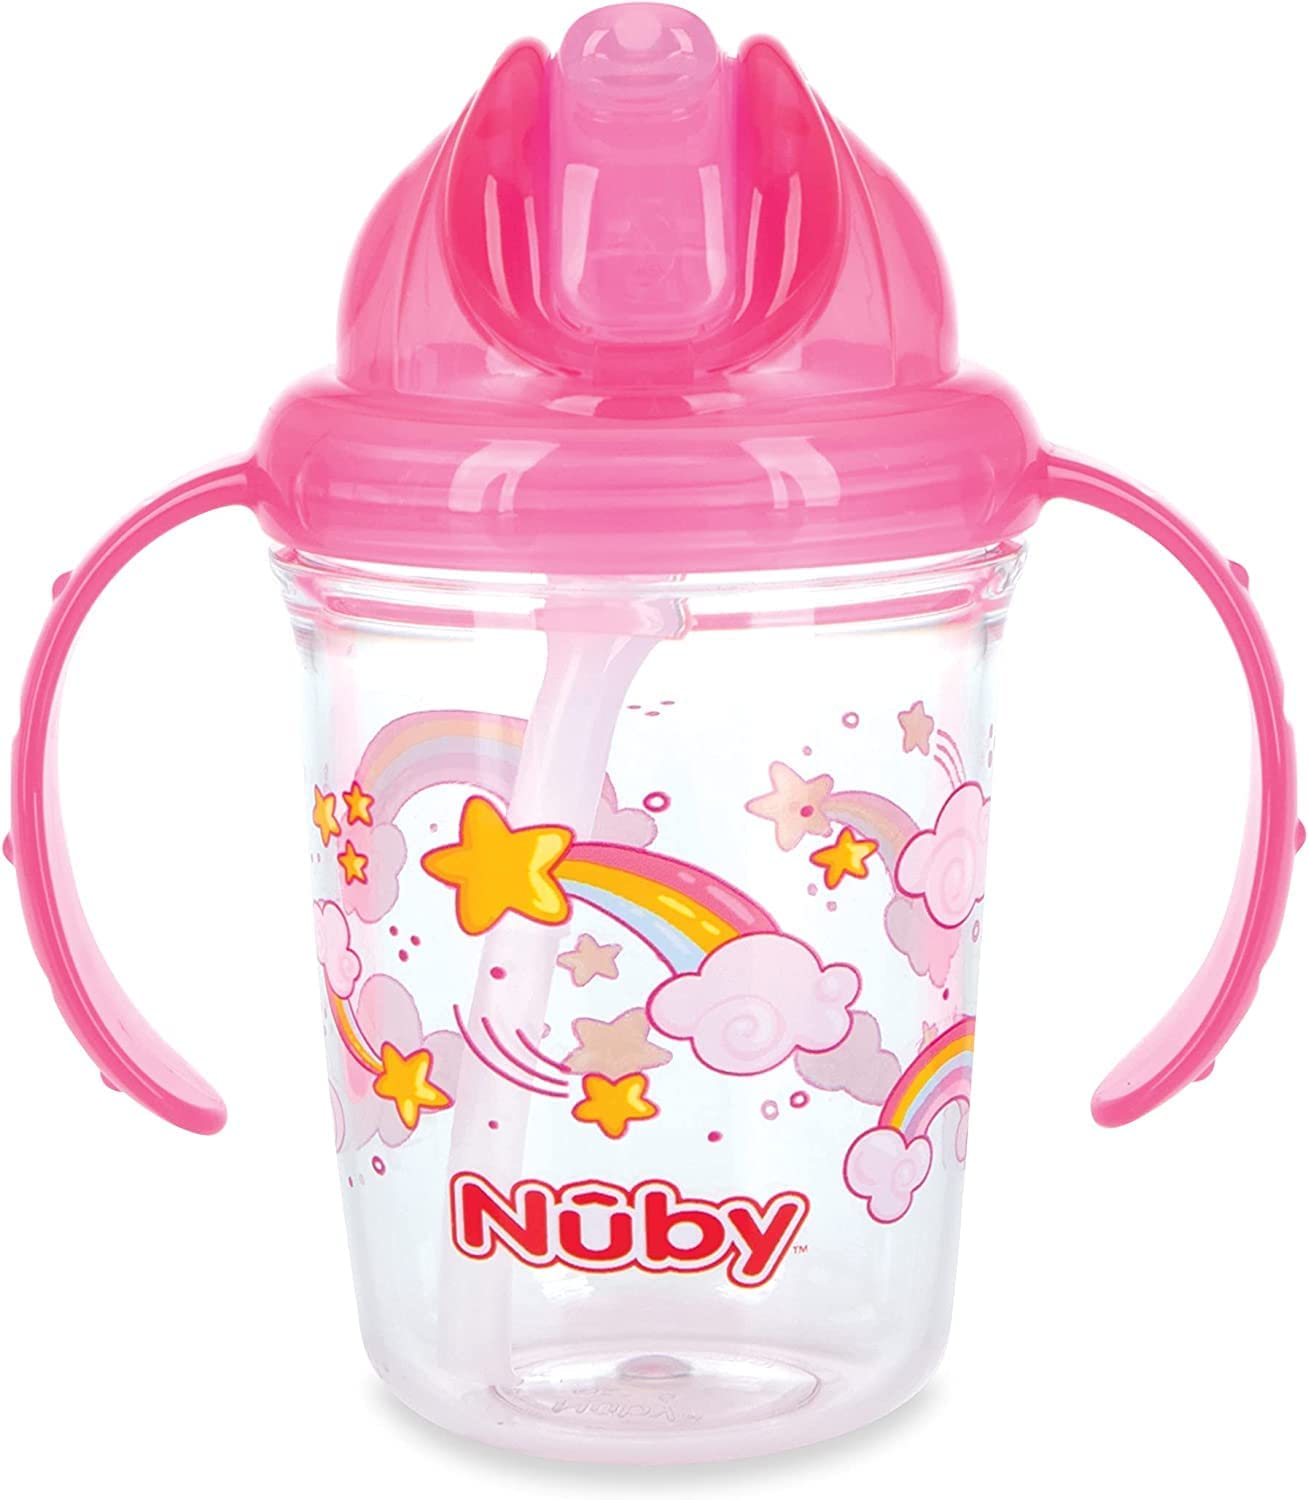 Nuby No-Spill Flip-It Straw Cups, 2-Pack